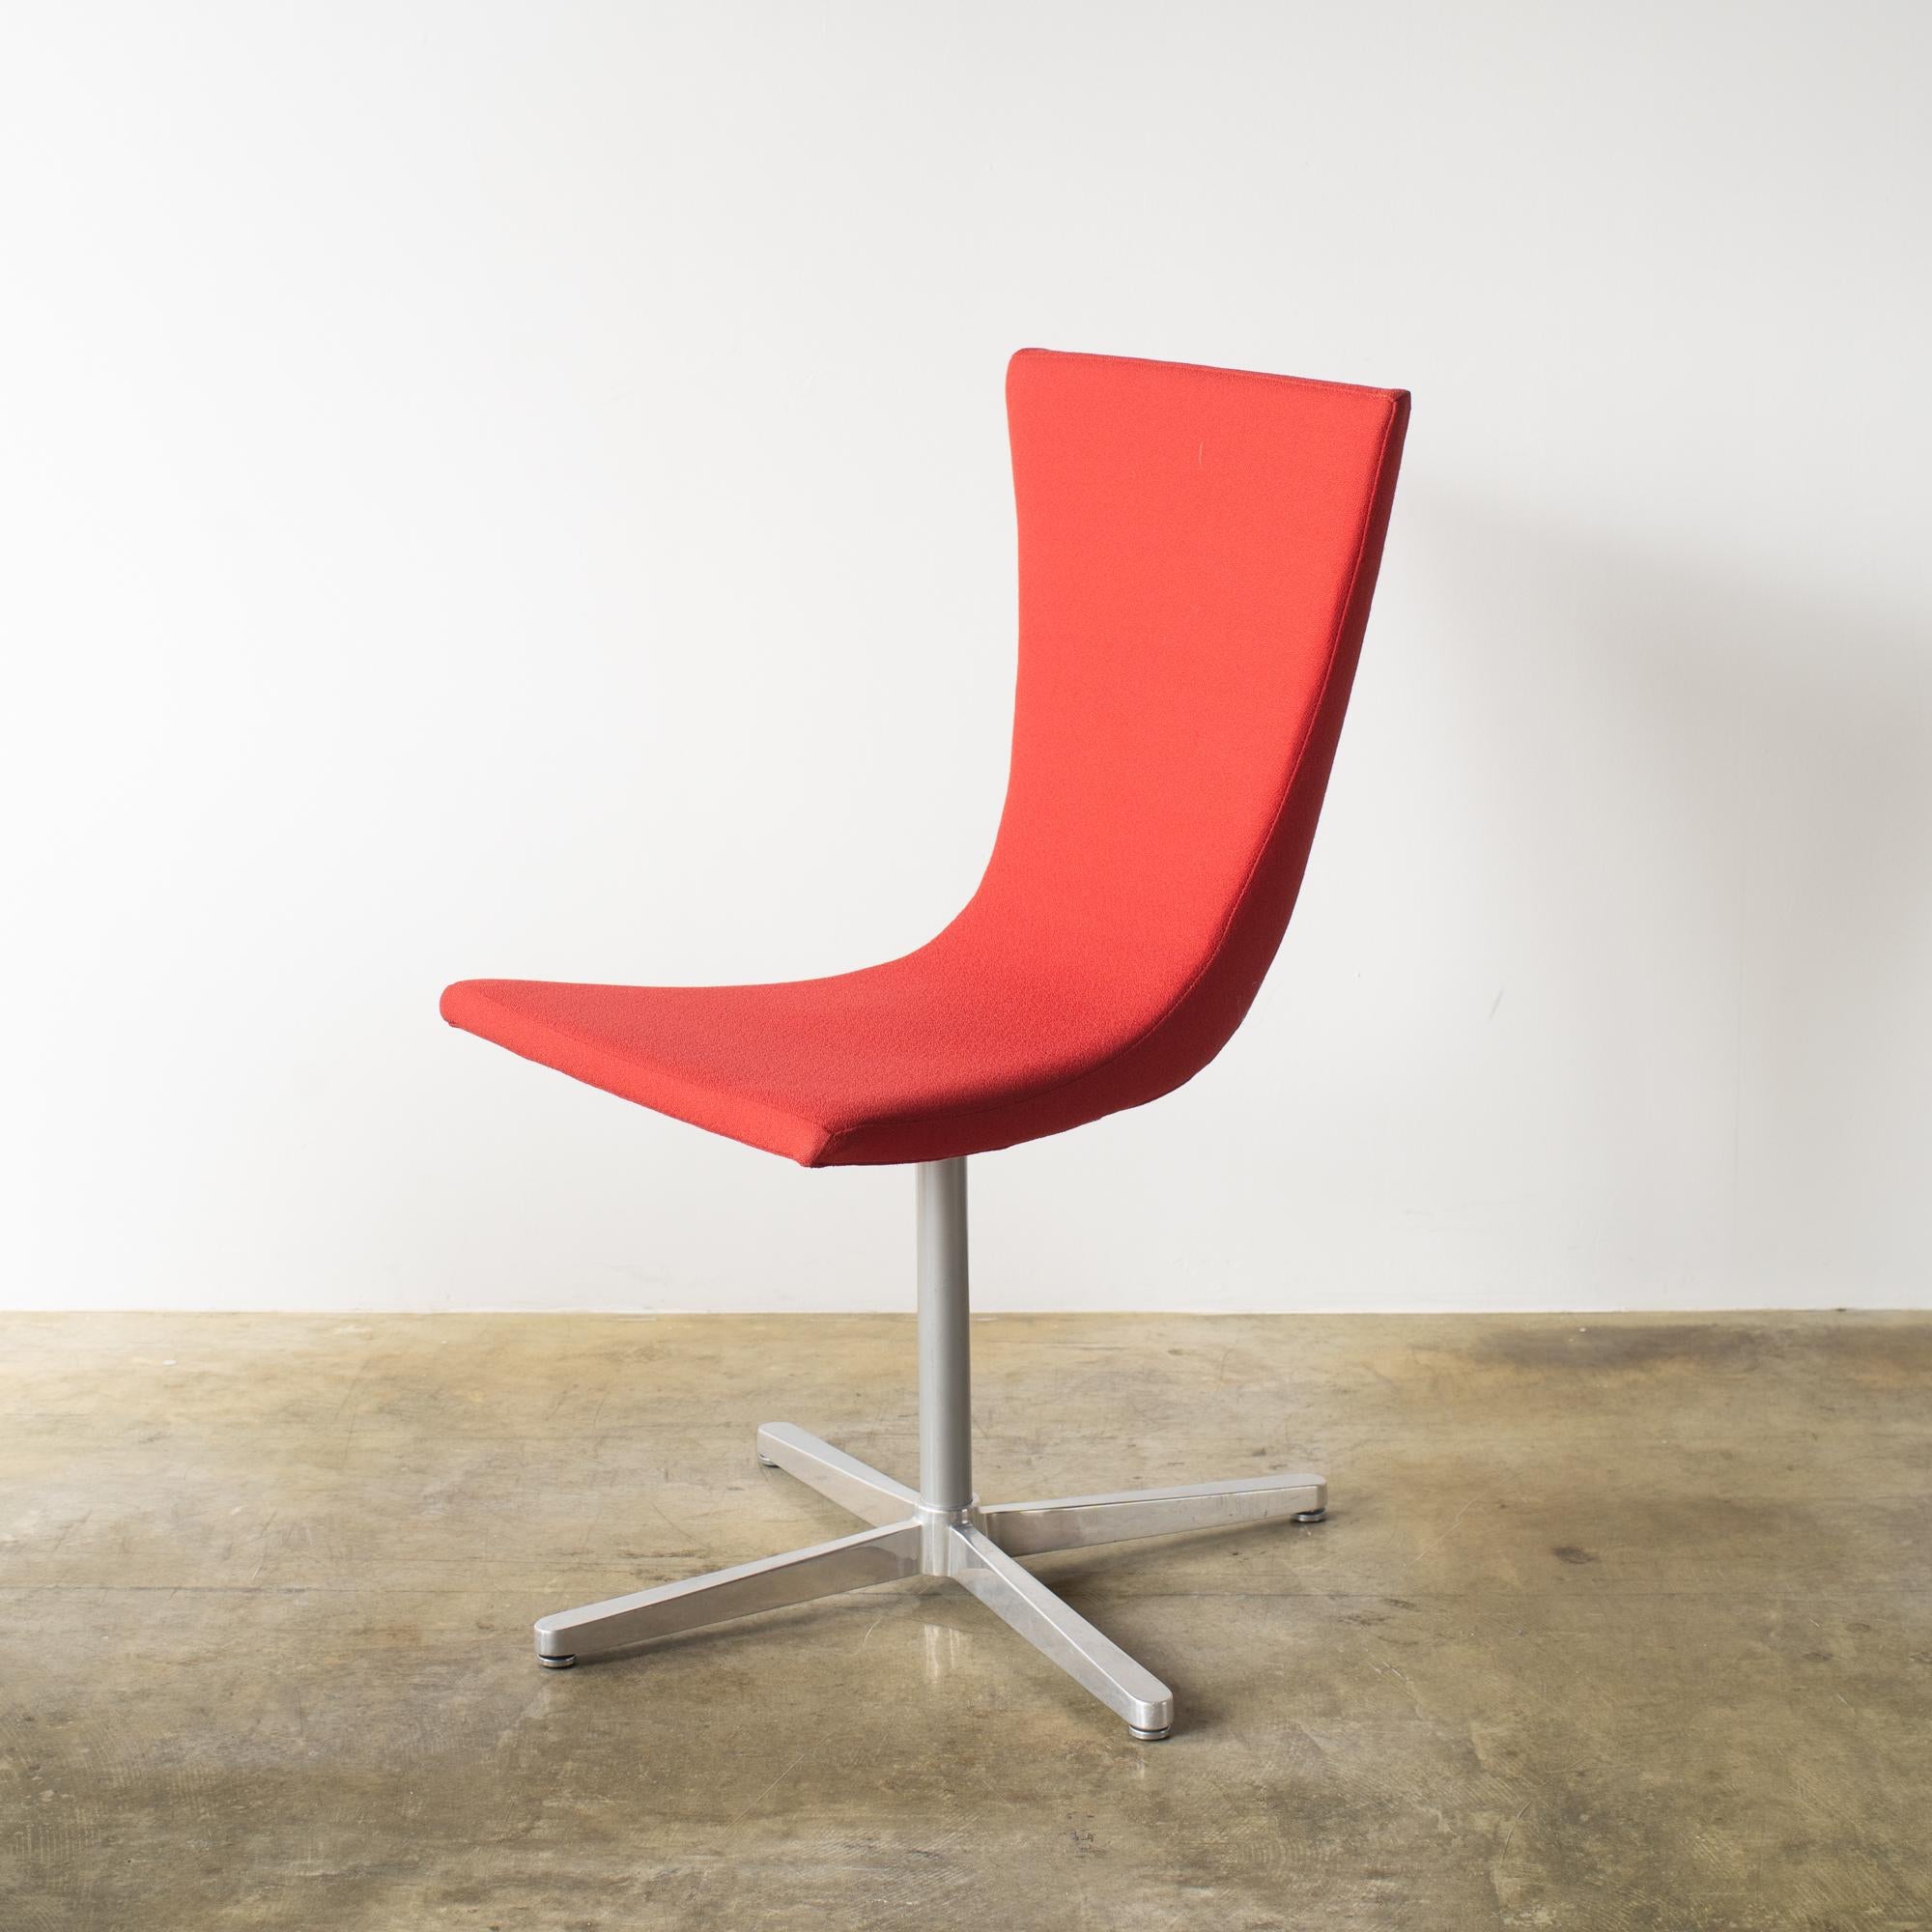 Swivel red fabric chair.  Christian Ghion designed it in the late 90s for Idee Japan. 
It's the style in Y2K interior and design. Also really great example in that era. 
 